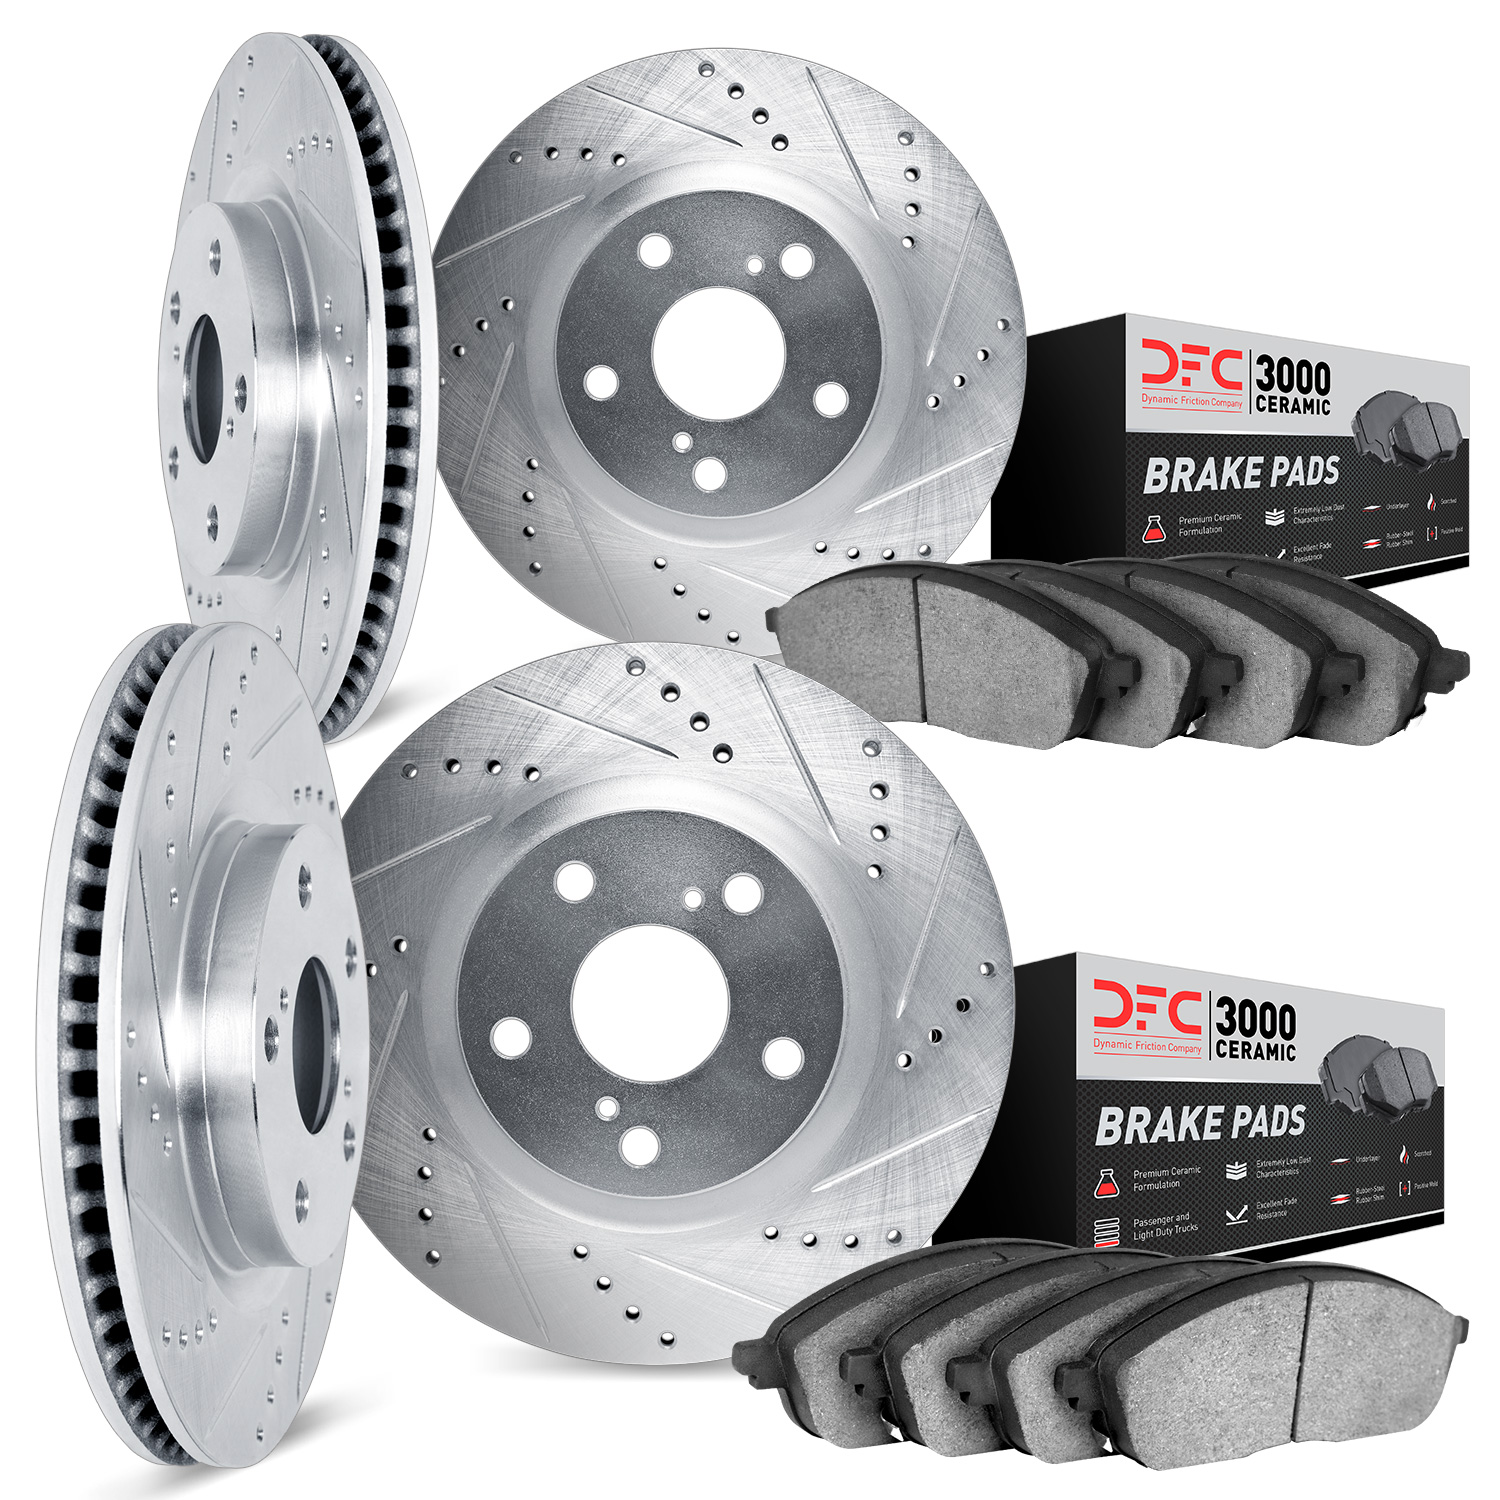 7304-75026 Drilled/Slotted Brake Rotor with 3000-Series Ceramic Brake Pads Kit [Silver], Fits Select Lexus/Toyota/Scion, Positio